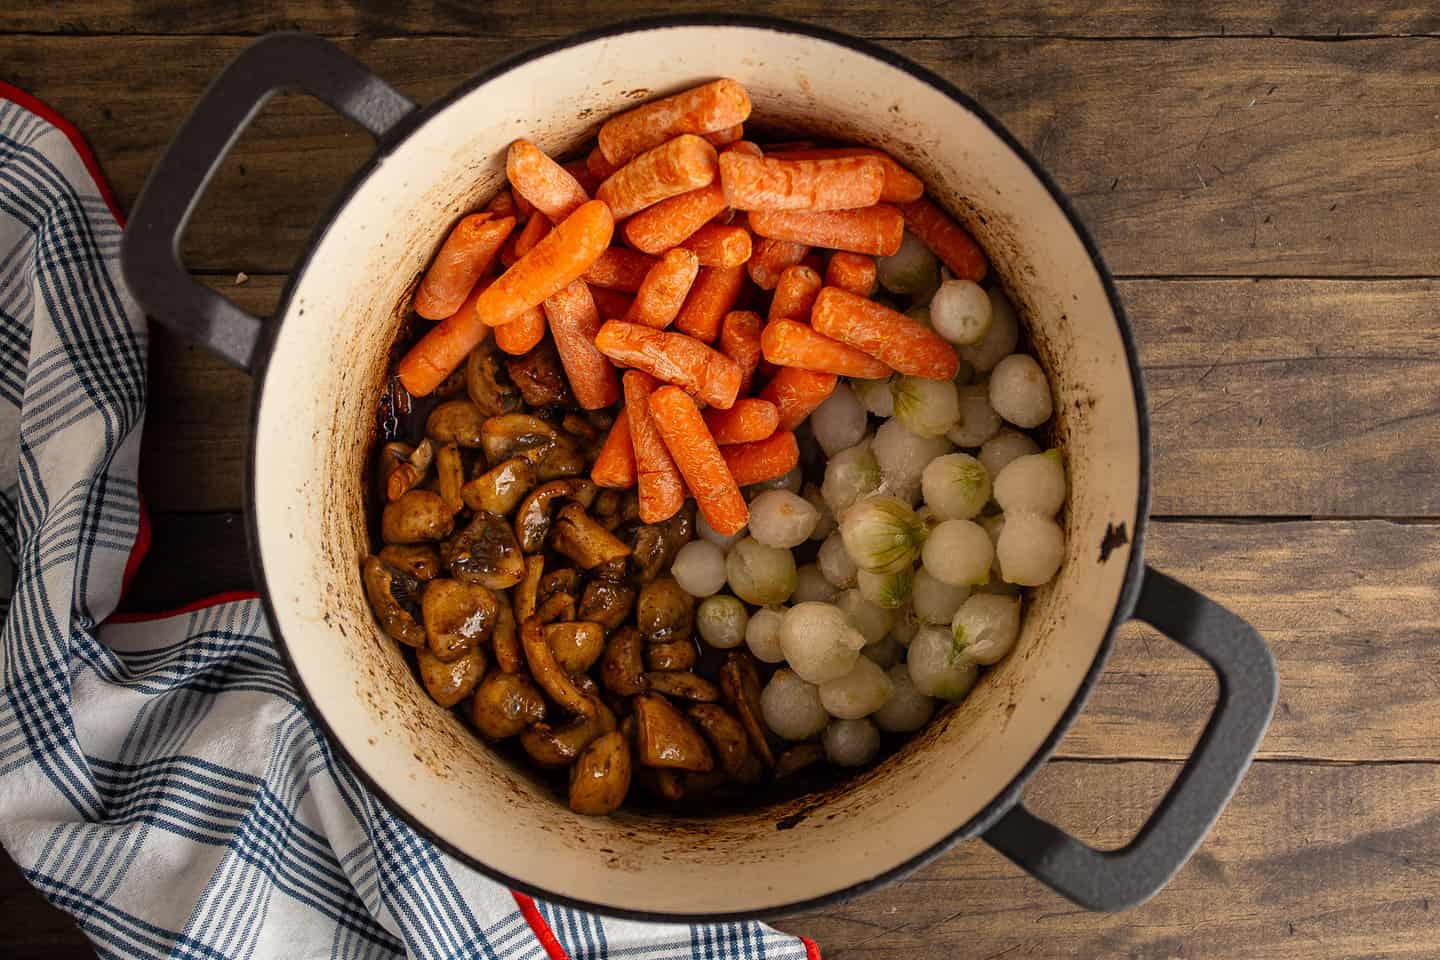 Sauteeing mushrooms, carrots, and pearl onions.